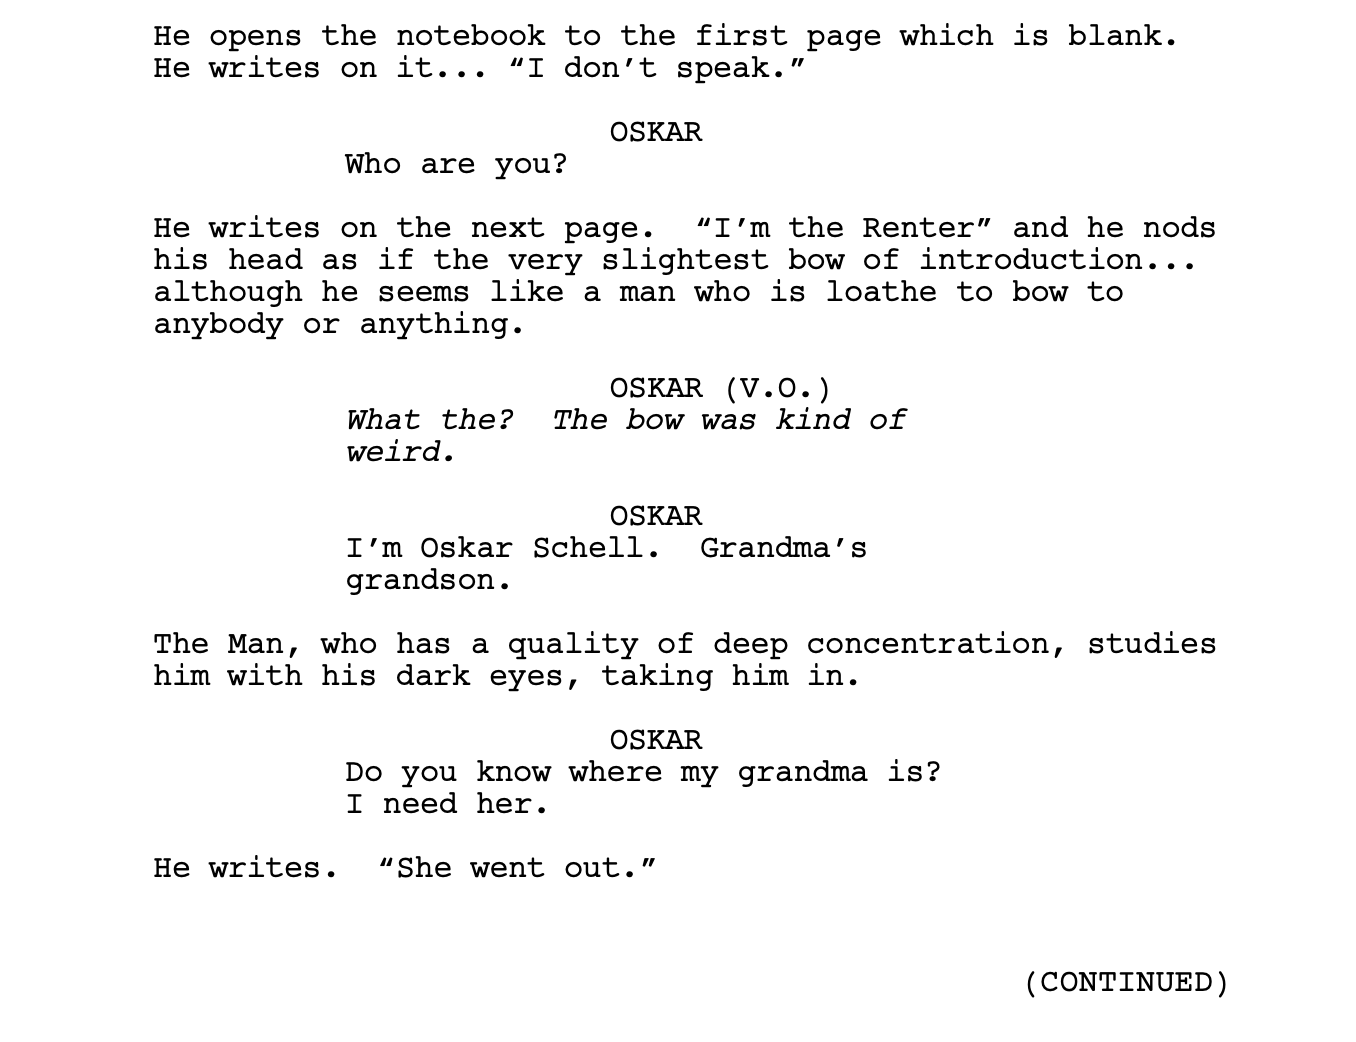 WRITING YOUR SCREENPLAY WHILE SOCIAL DISTANCING: TEXT ON SCREEN